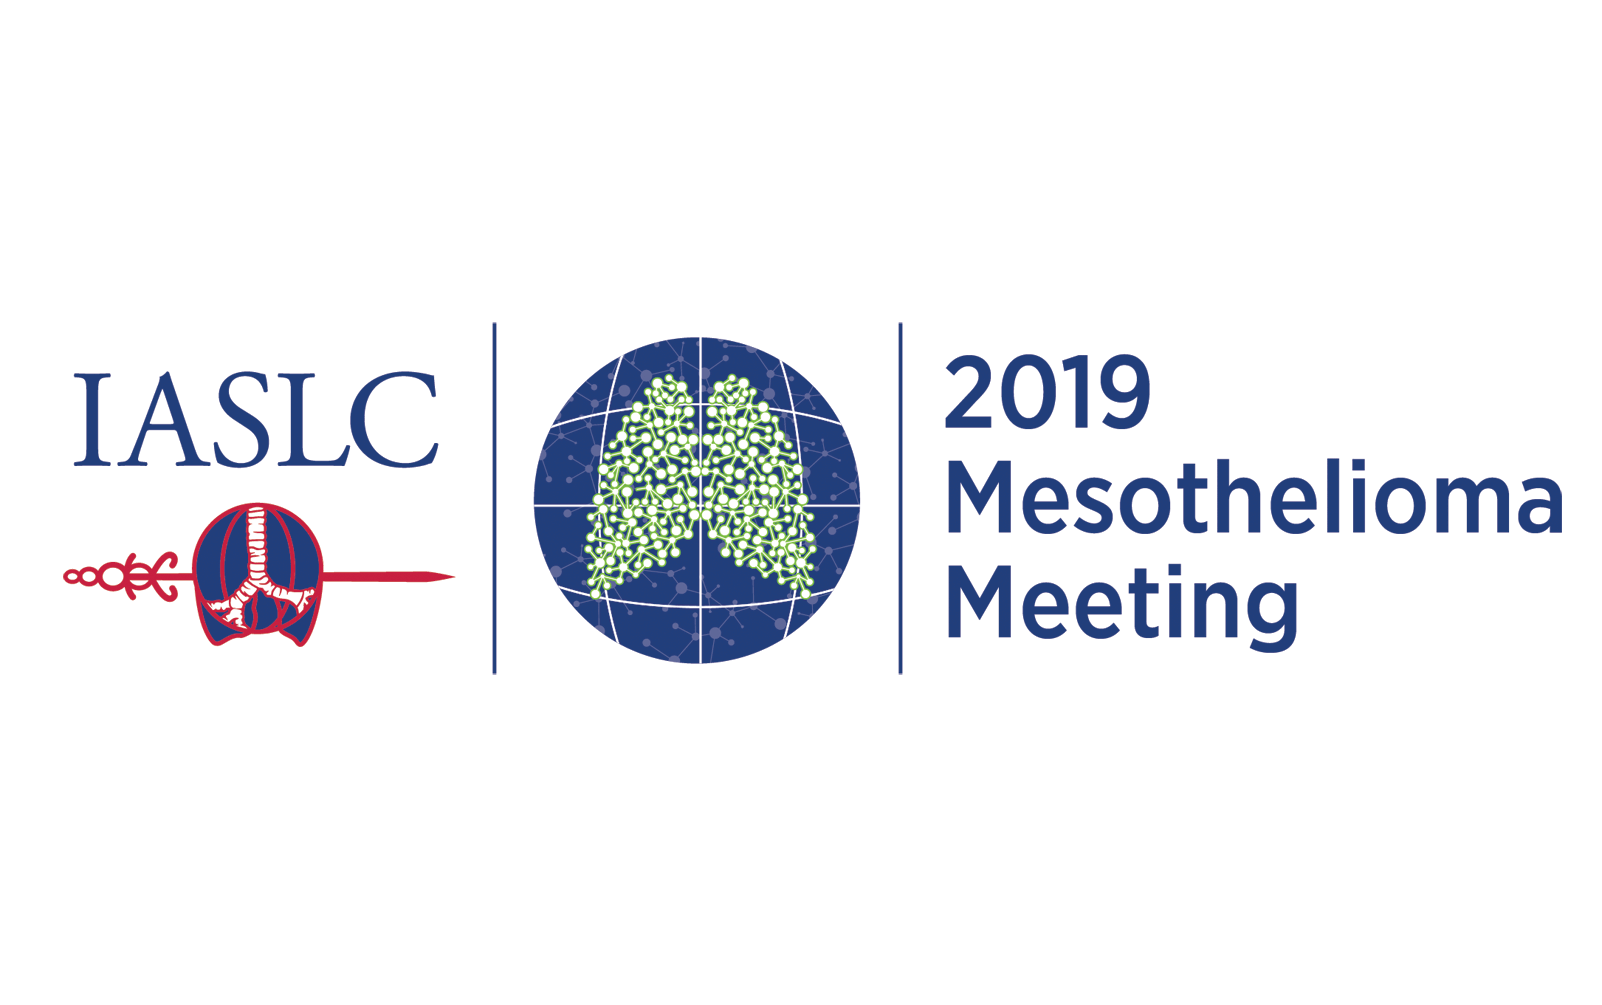 IASLC 2019 Mesothelioma Meeting Offers Innovative Approach for Rapid Learning